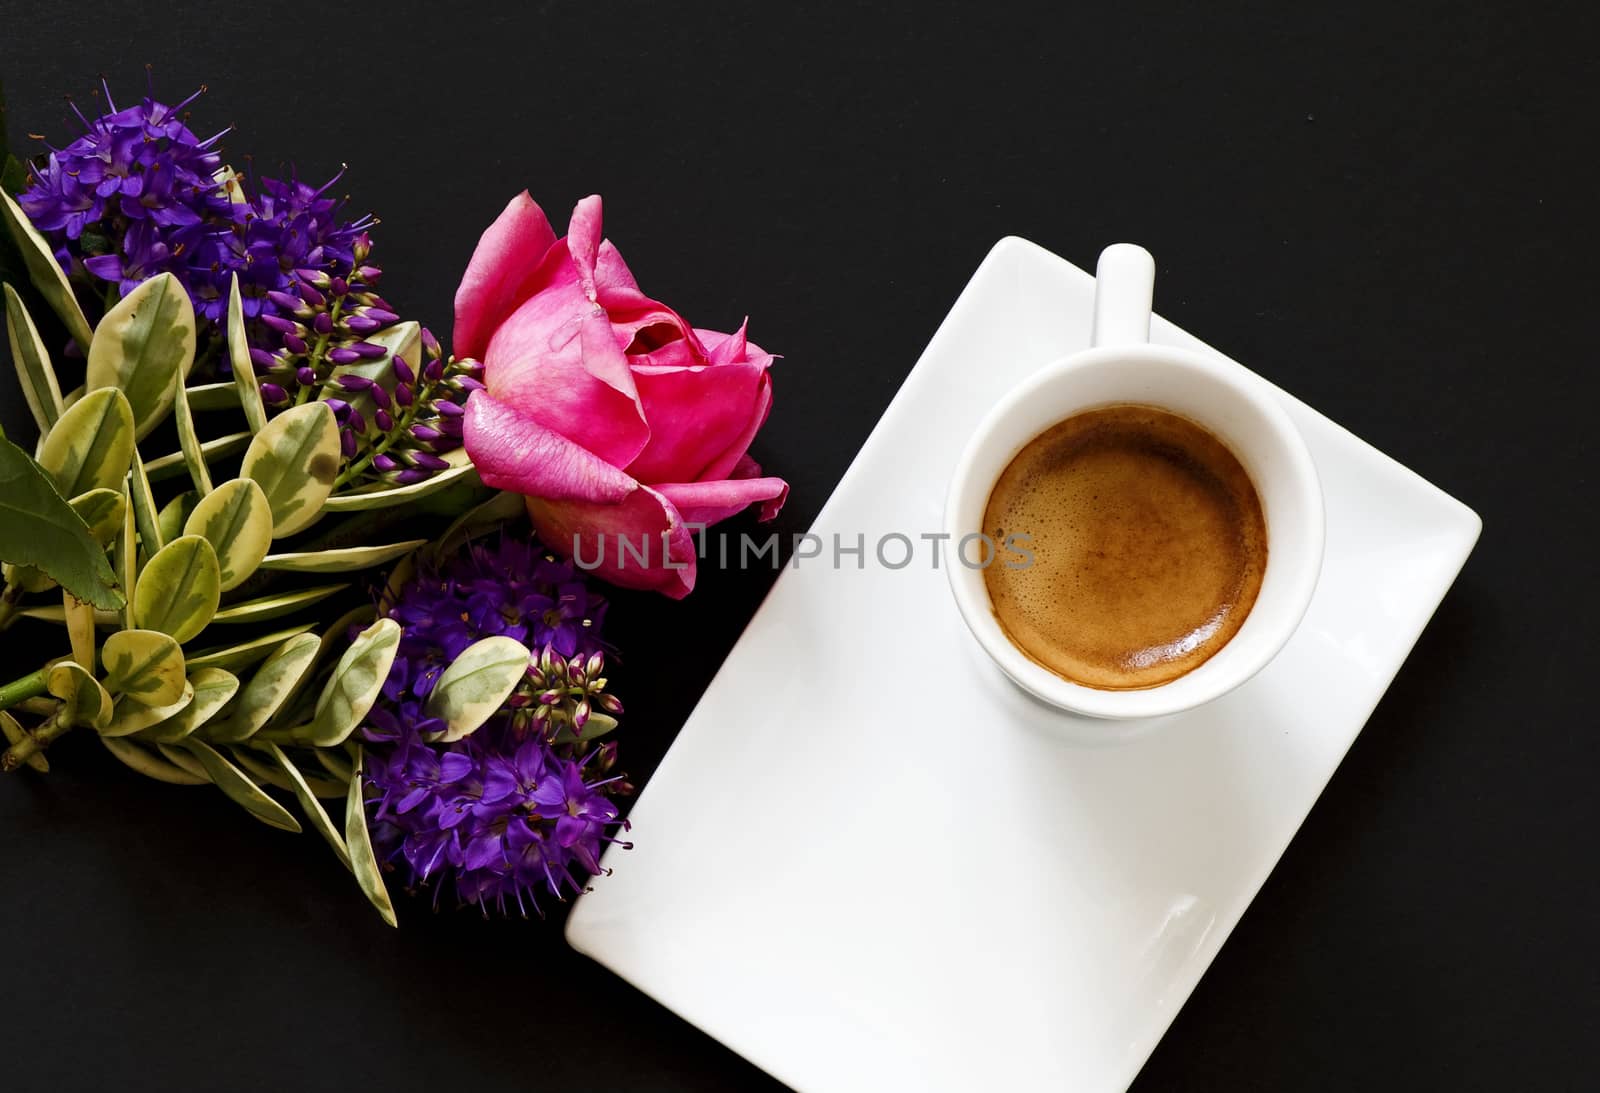 Particular decoration of the coffee cup positioned on the rectangular plate